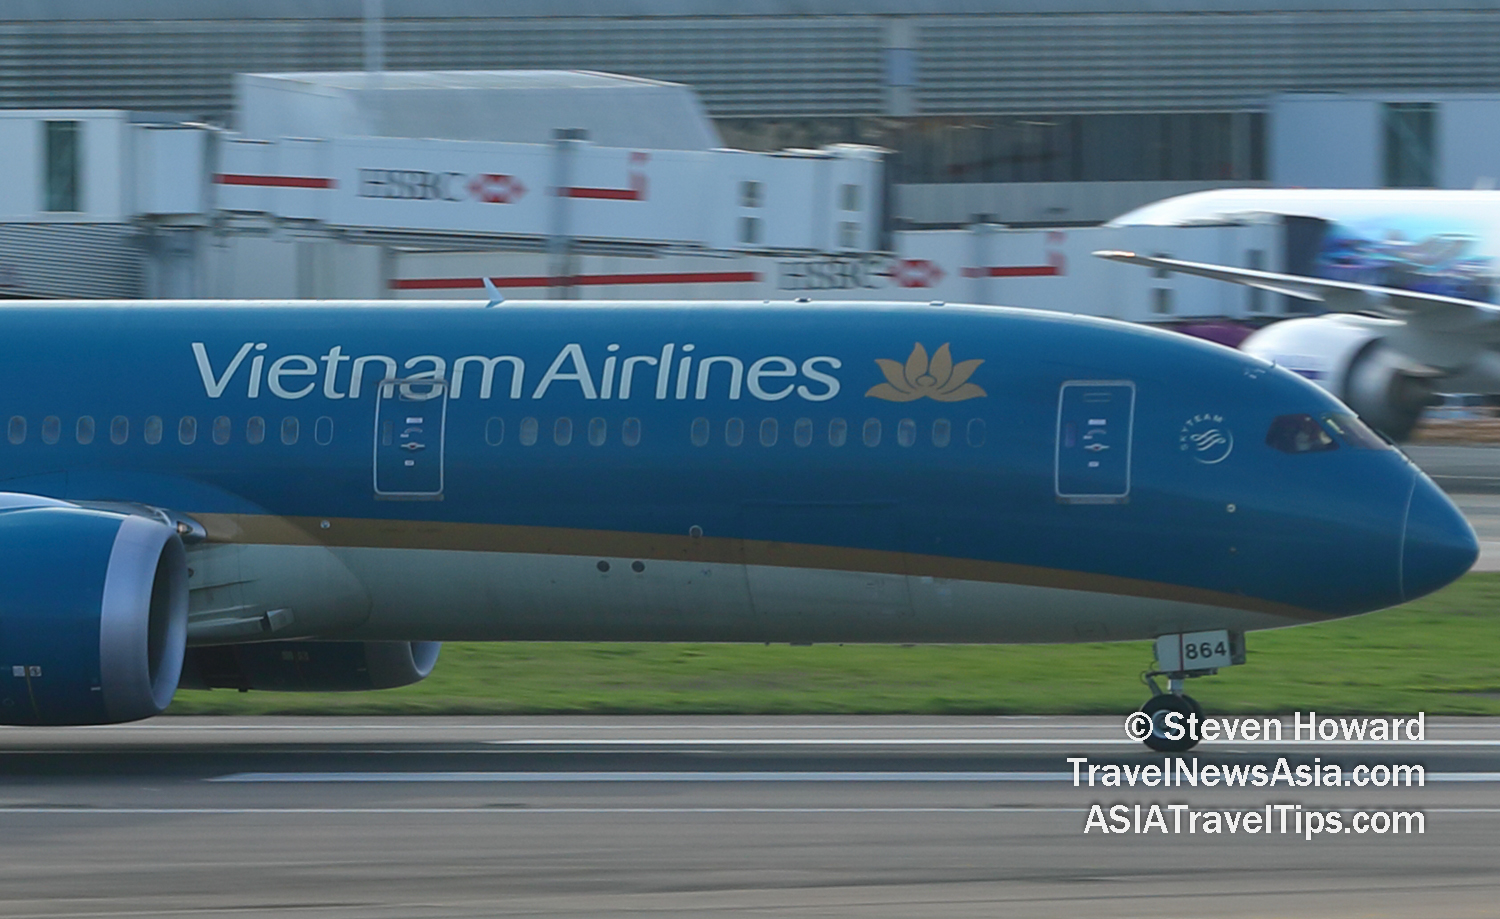 Vietnam Airlines Boeing 787-8 reg: VN-A864 landing at London Heathrow. Picture by Steven Howard of TravelNewsAsia.com Click to enlarge.